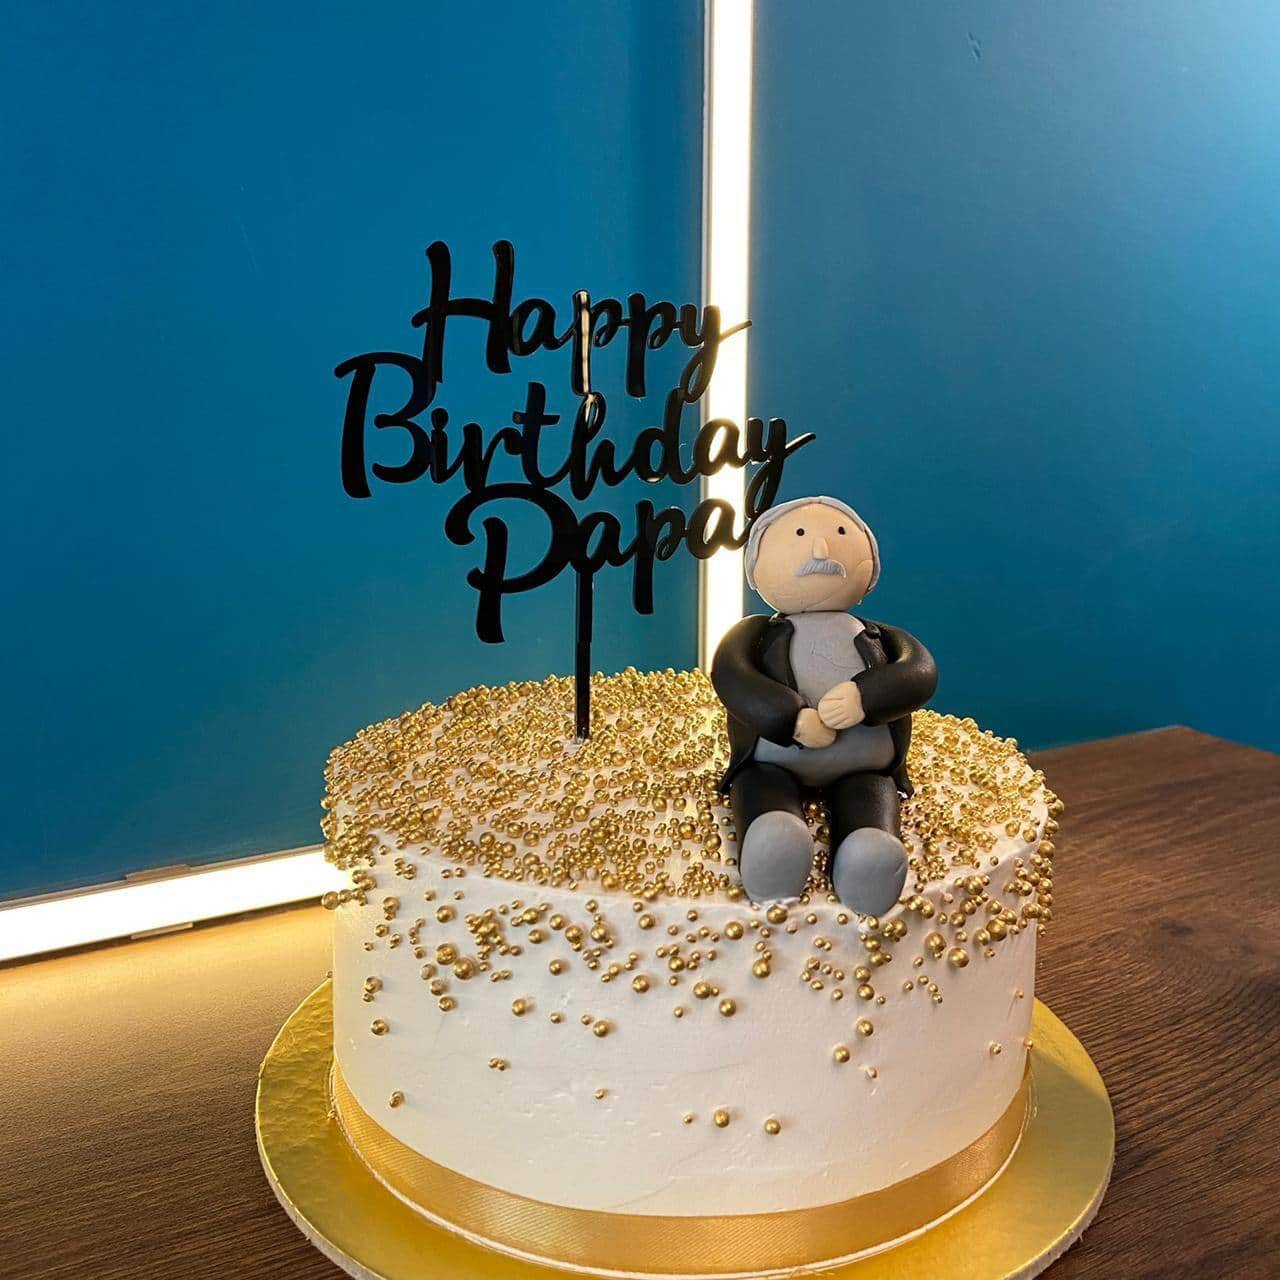 Designer Cake for 8month Birthday 🎉 . . . DM to Book Your Designer Cake .  . Check us out on Zomato Swiggy to enjoy wide range of eggl... | Instagram